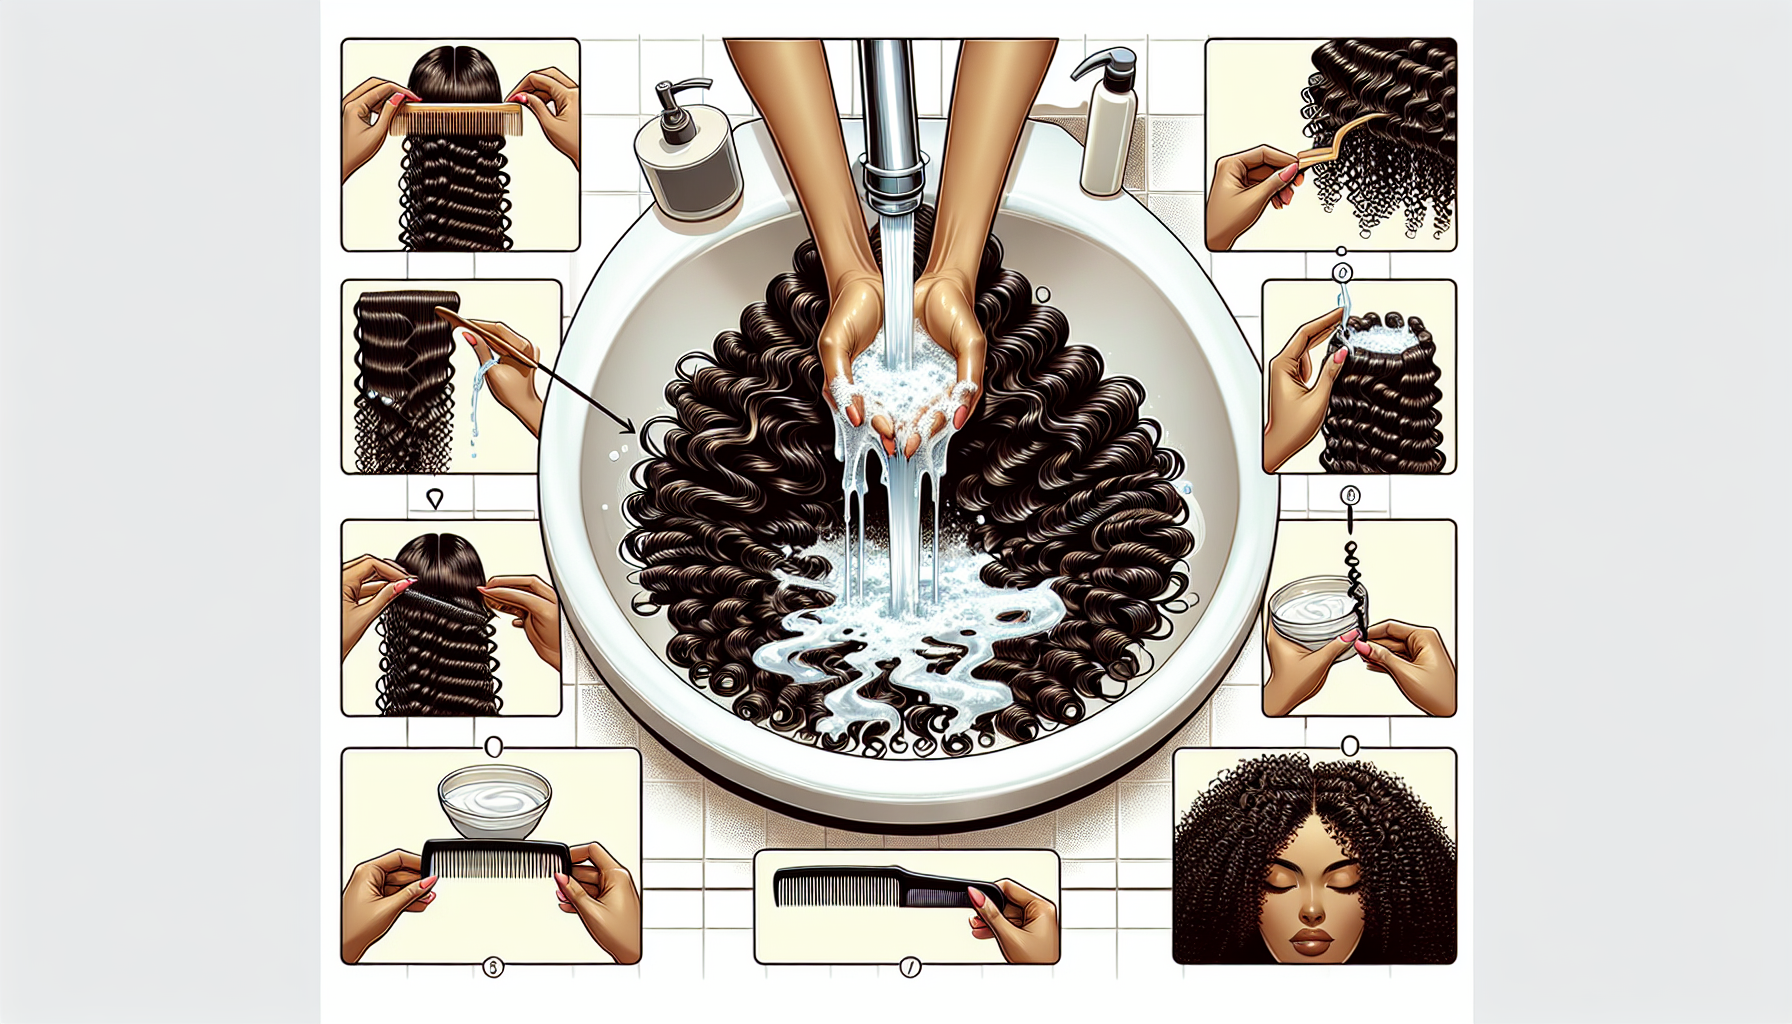 Illustration of proper washing and conditioning techniques for curly extensions